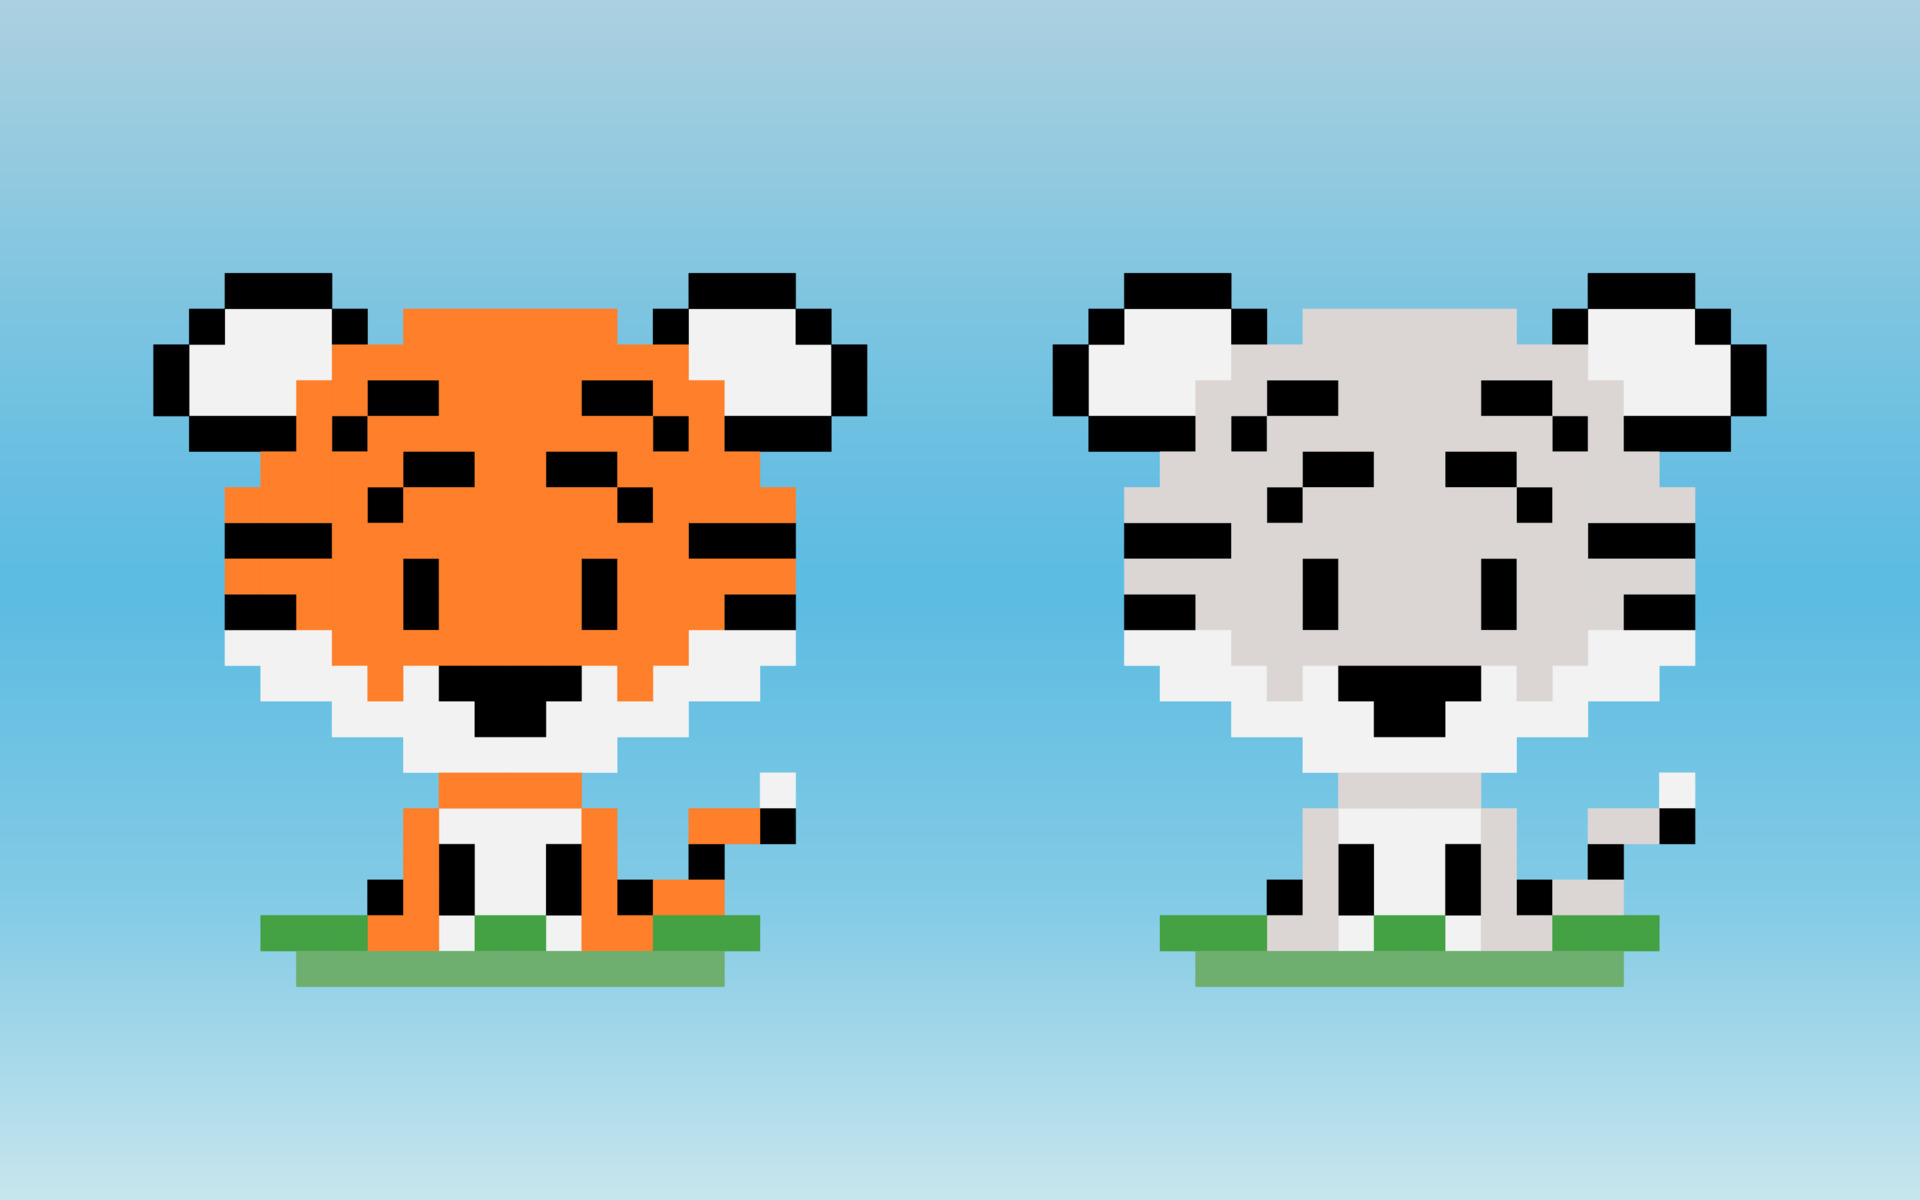 8 bit pixel a tiger. Animals for game assets and cross stitch ...